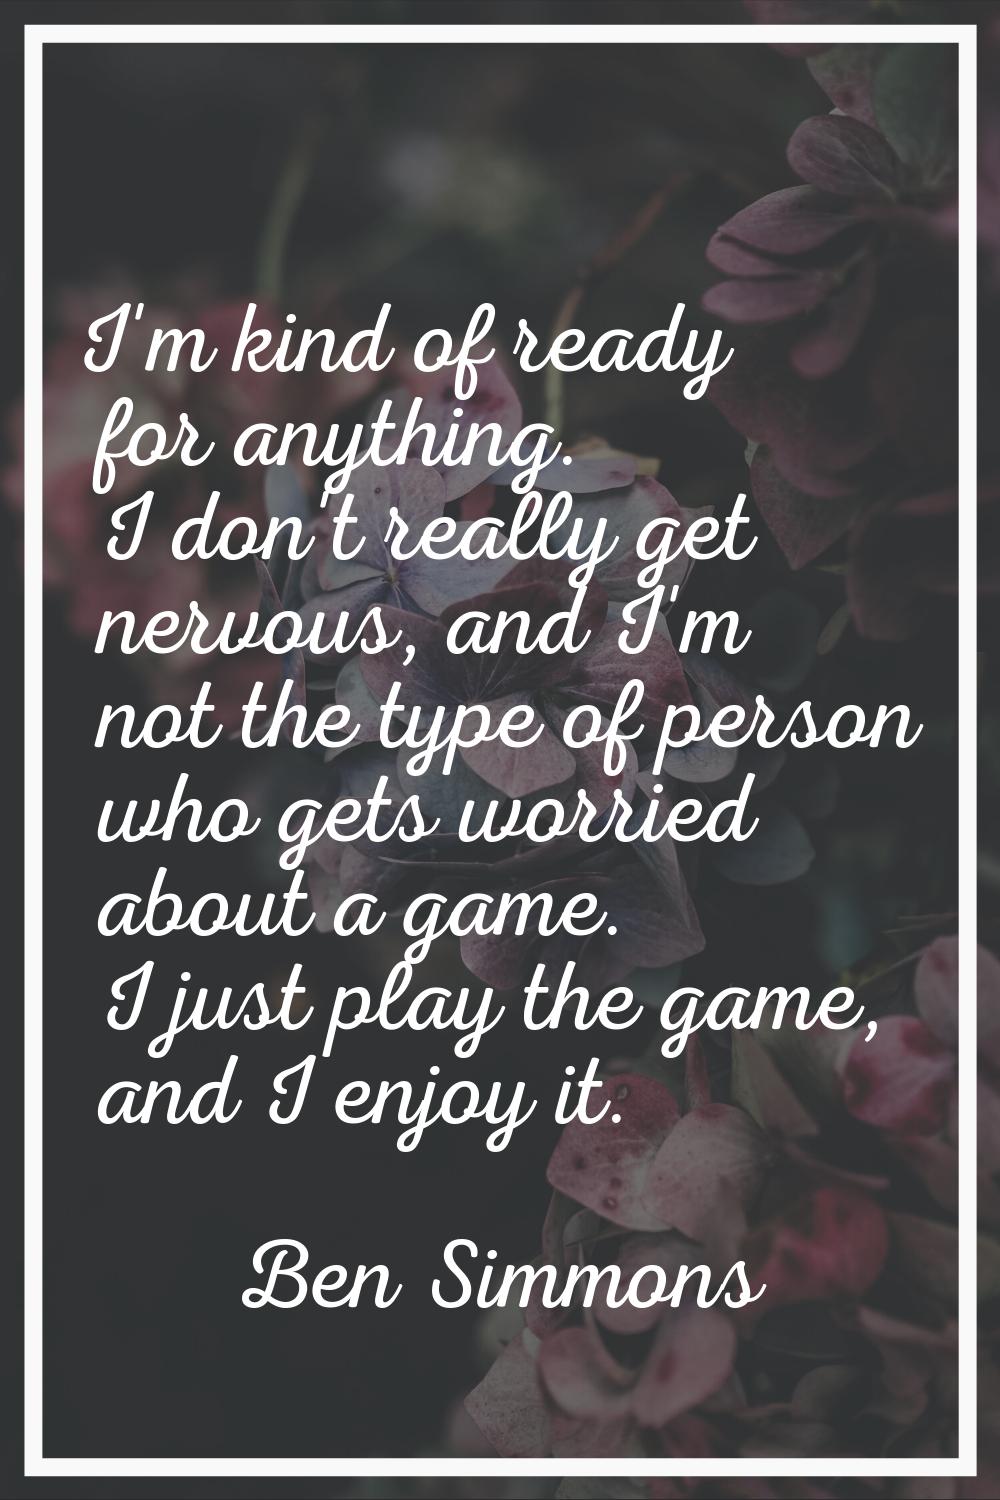 I'm kind of ready for anything. I don't really get nervous, and I'm not the type of person who gets